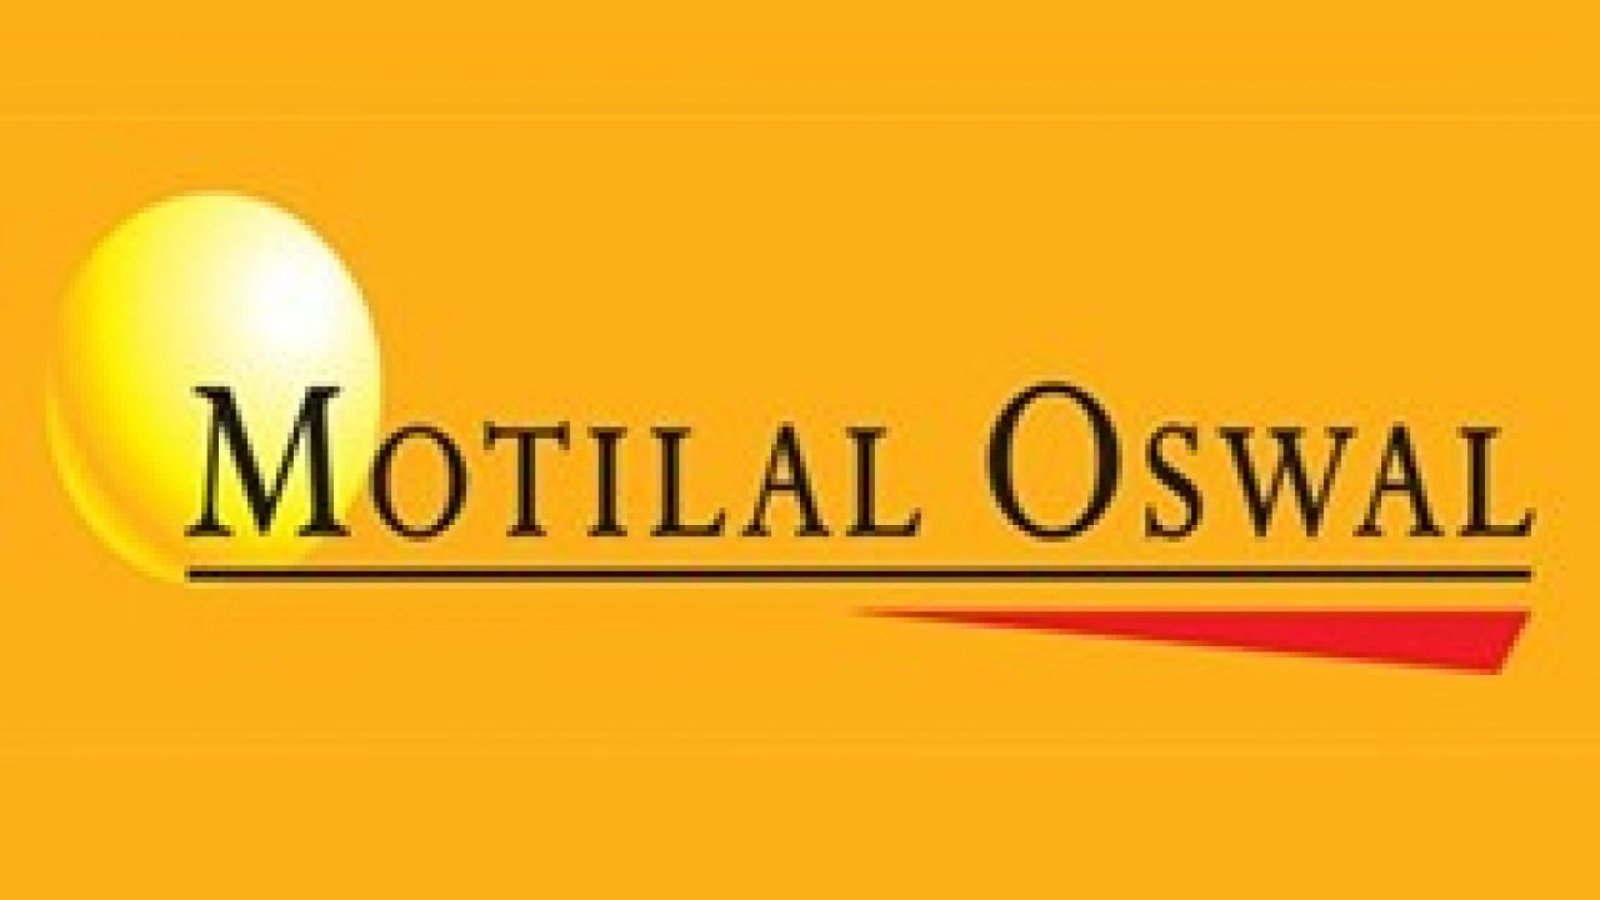 Motilal Oswal Broker Review Pros & Cons, User Reviews, Other Insights